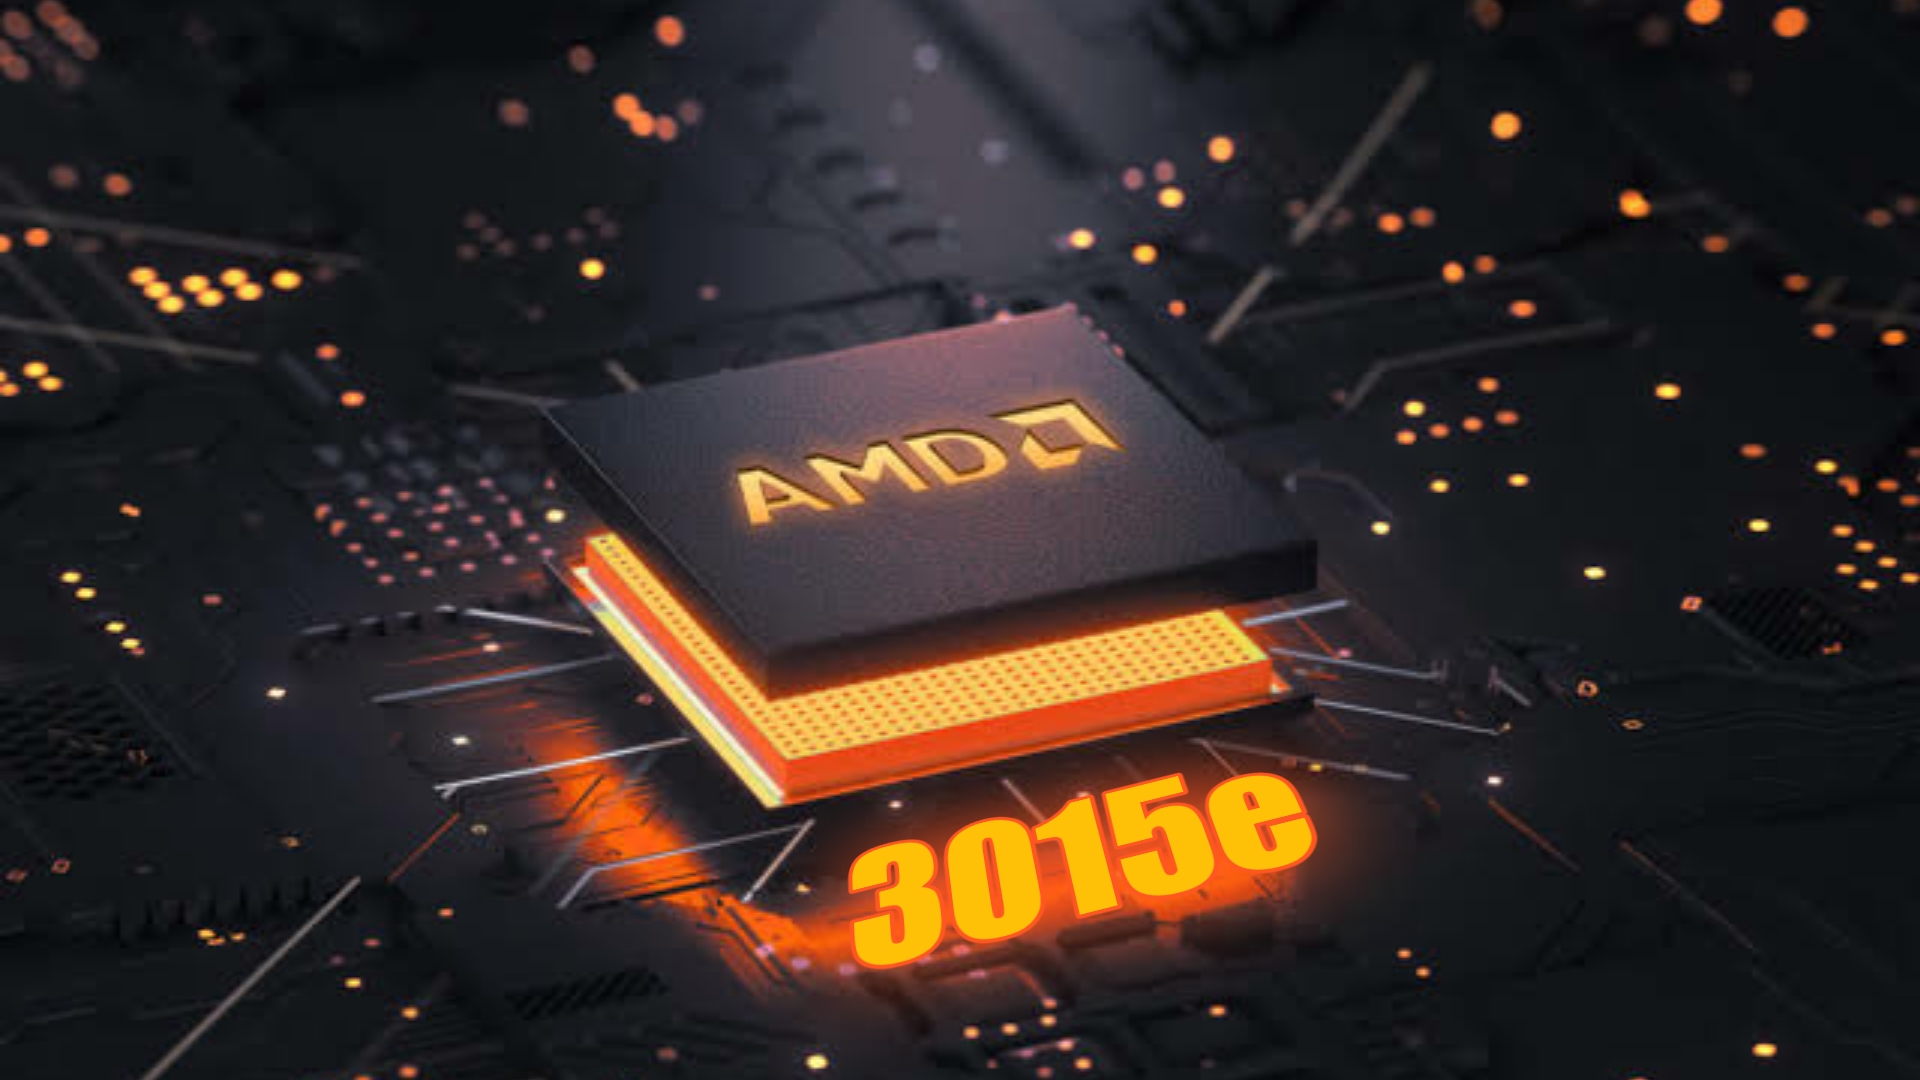 AMD 3015e, 3020e Processors finally launched, ready to compete with Intel’s Atom Processor